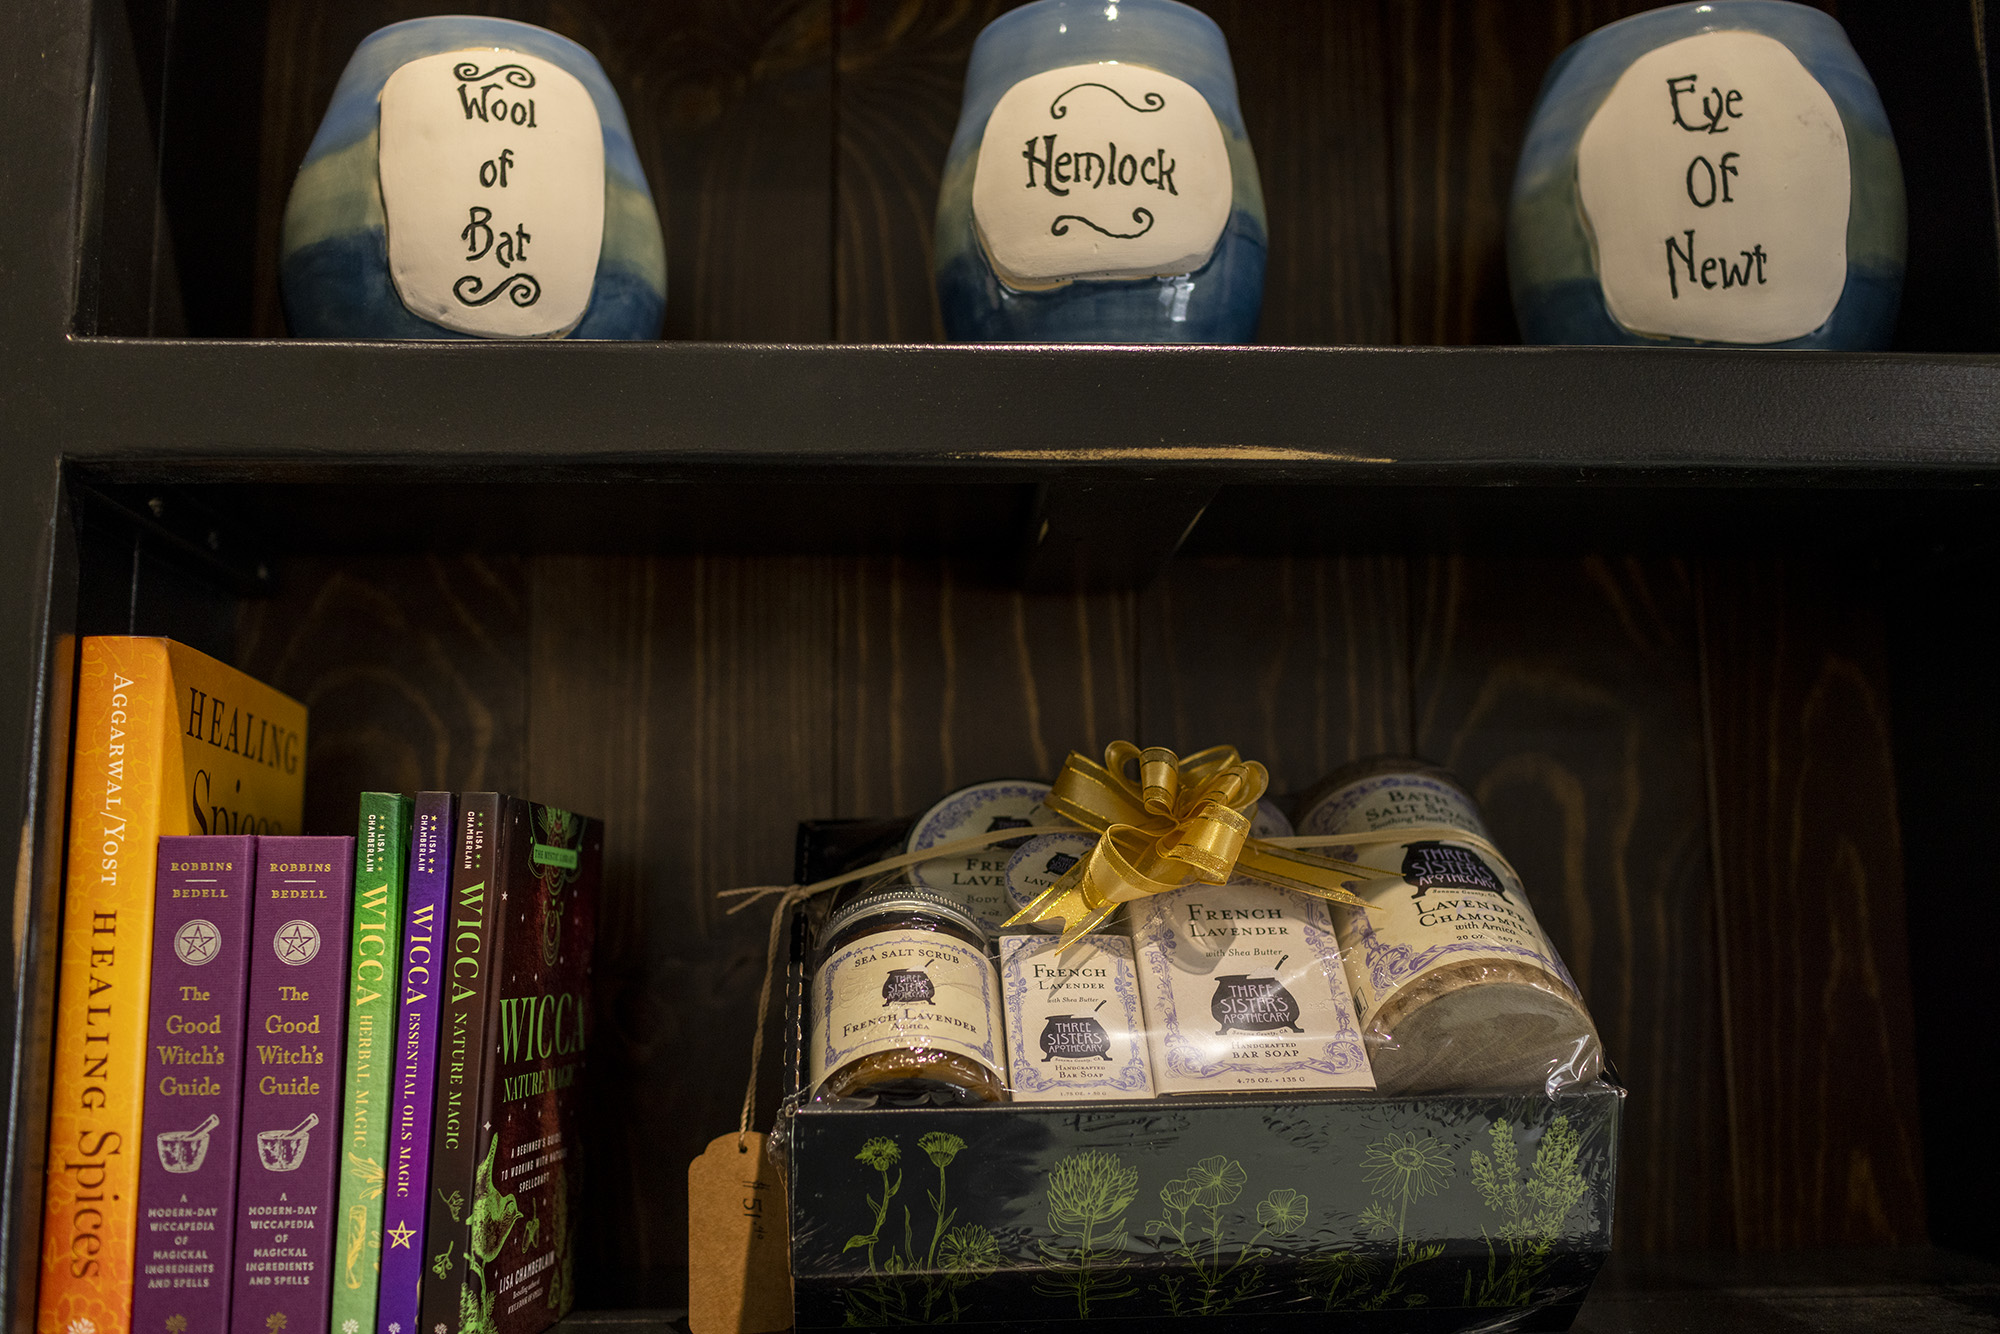 Decorative ceramic jars with the words wool of bat, hemlock, and eye of newt. Books on healing spices, which guide, and wicca. Three Sisters Apothecary French Lavender gift set with soaps, bath salts, and body butters.